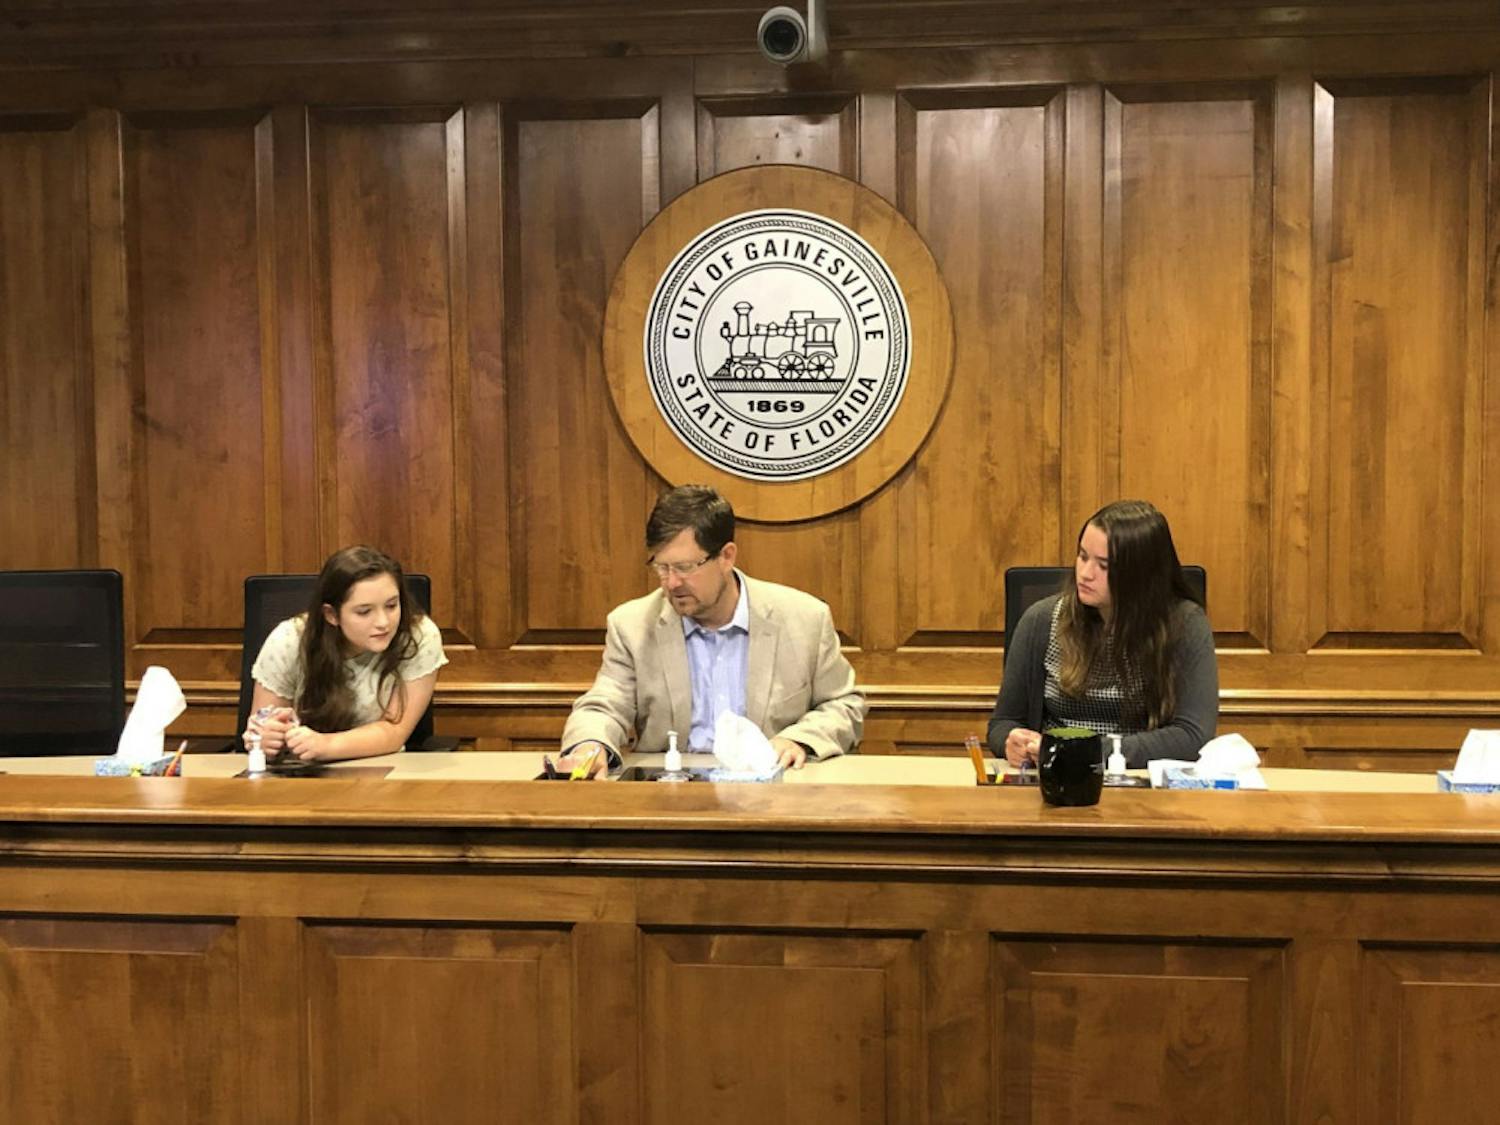 Mayor Lauren Poe (middle) allowed Keelyn Fife (left) and Alissa Humphrey (right) to sit in the city commission chairs while watching their peers’ presentation.